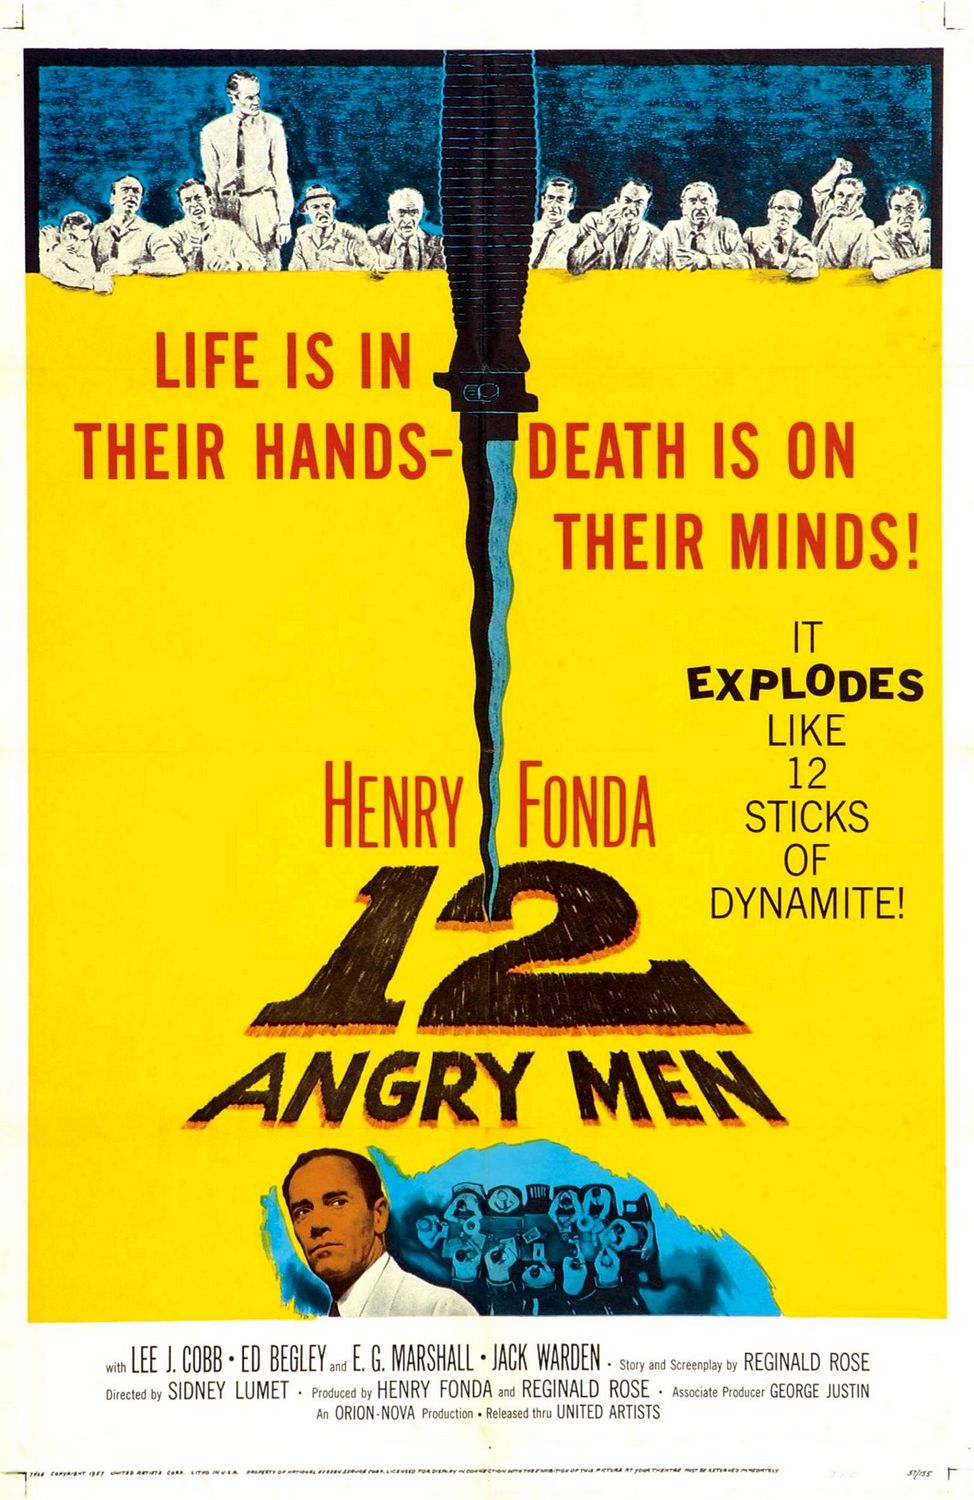 100 Movies List: 6. 12 Angry Men